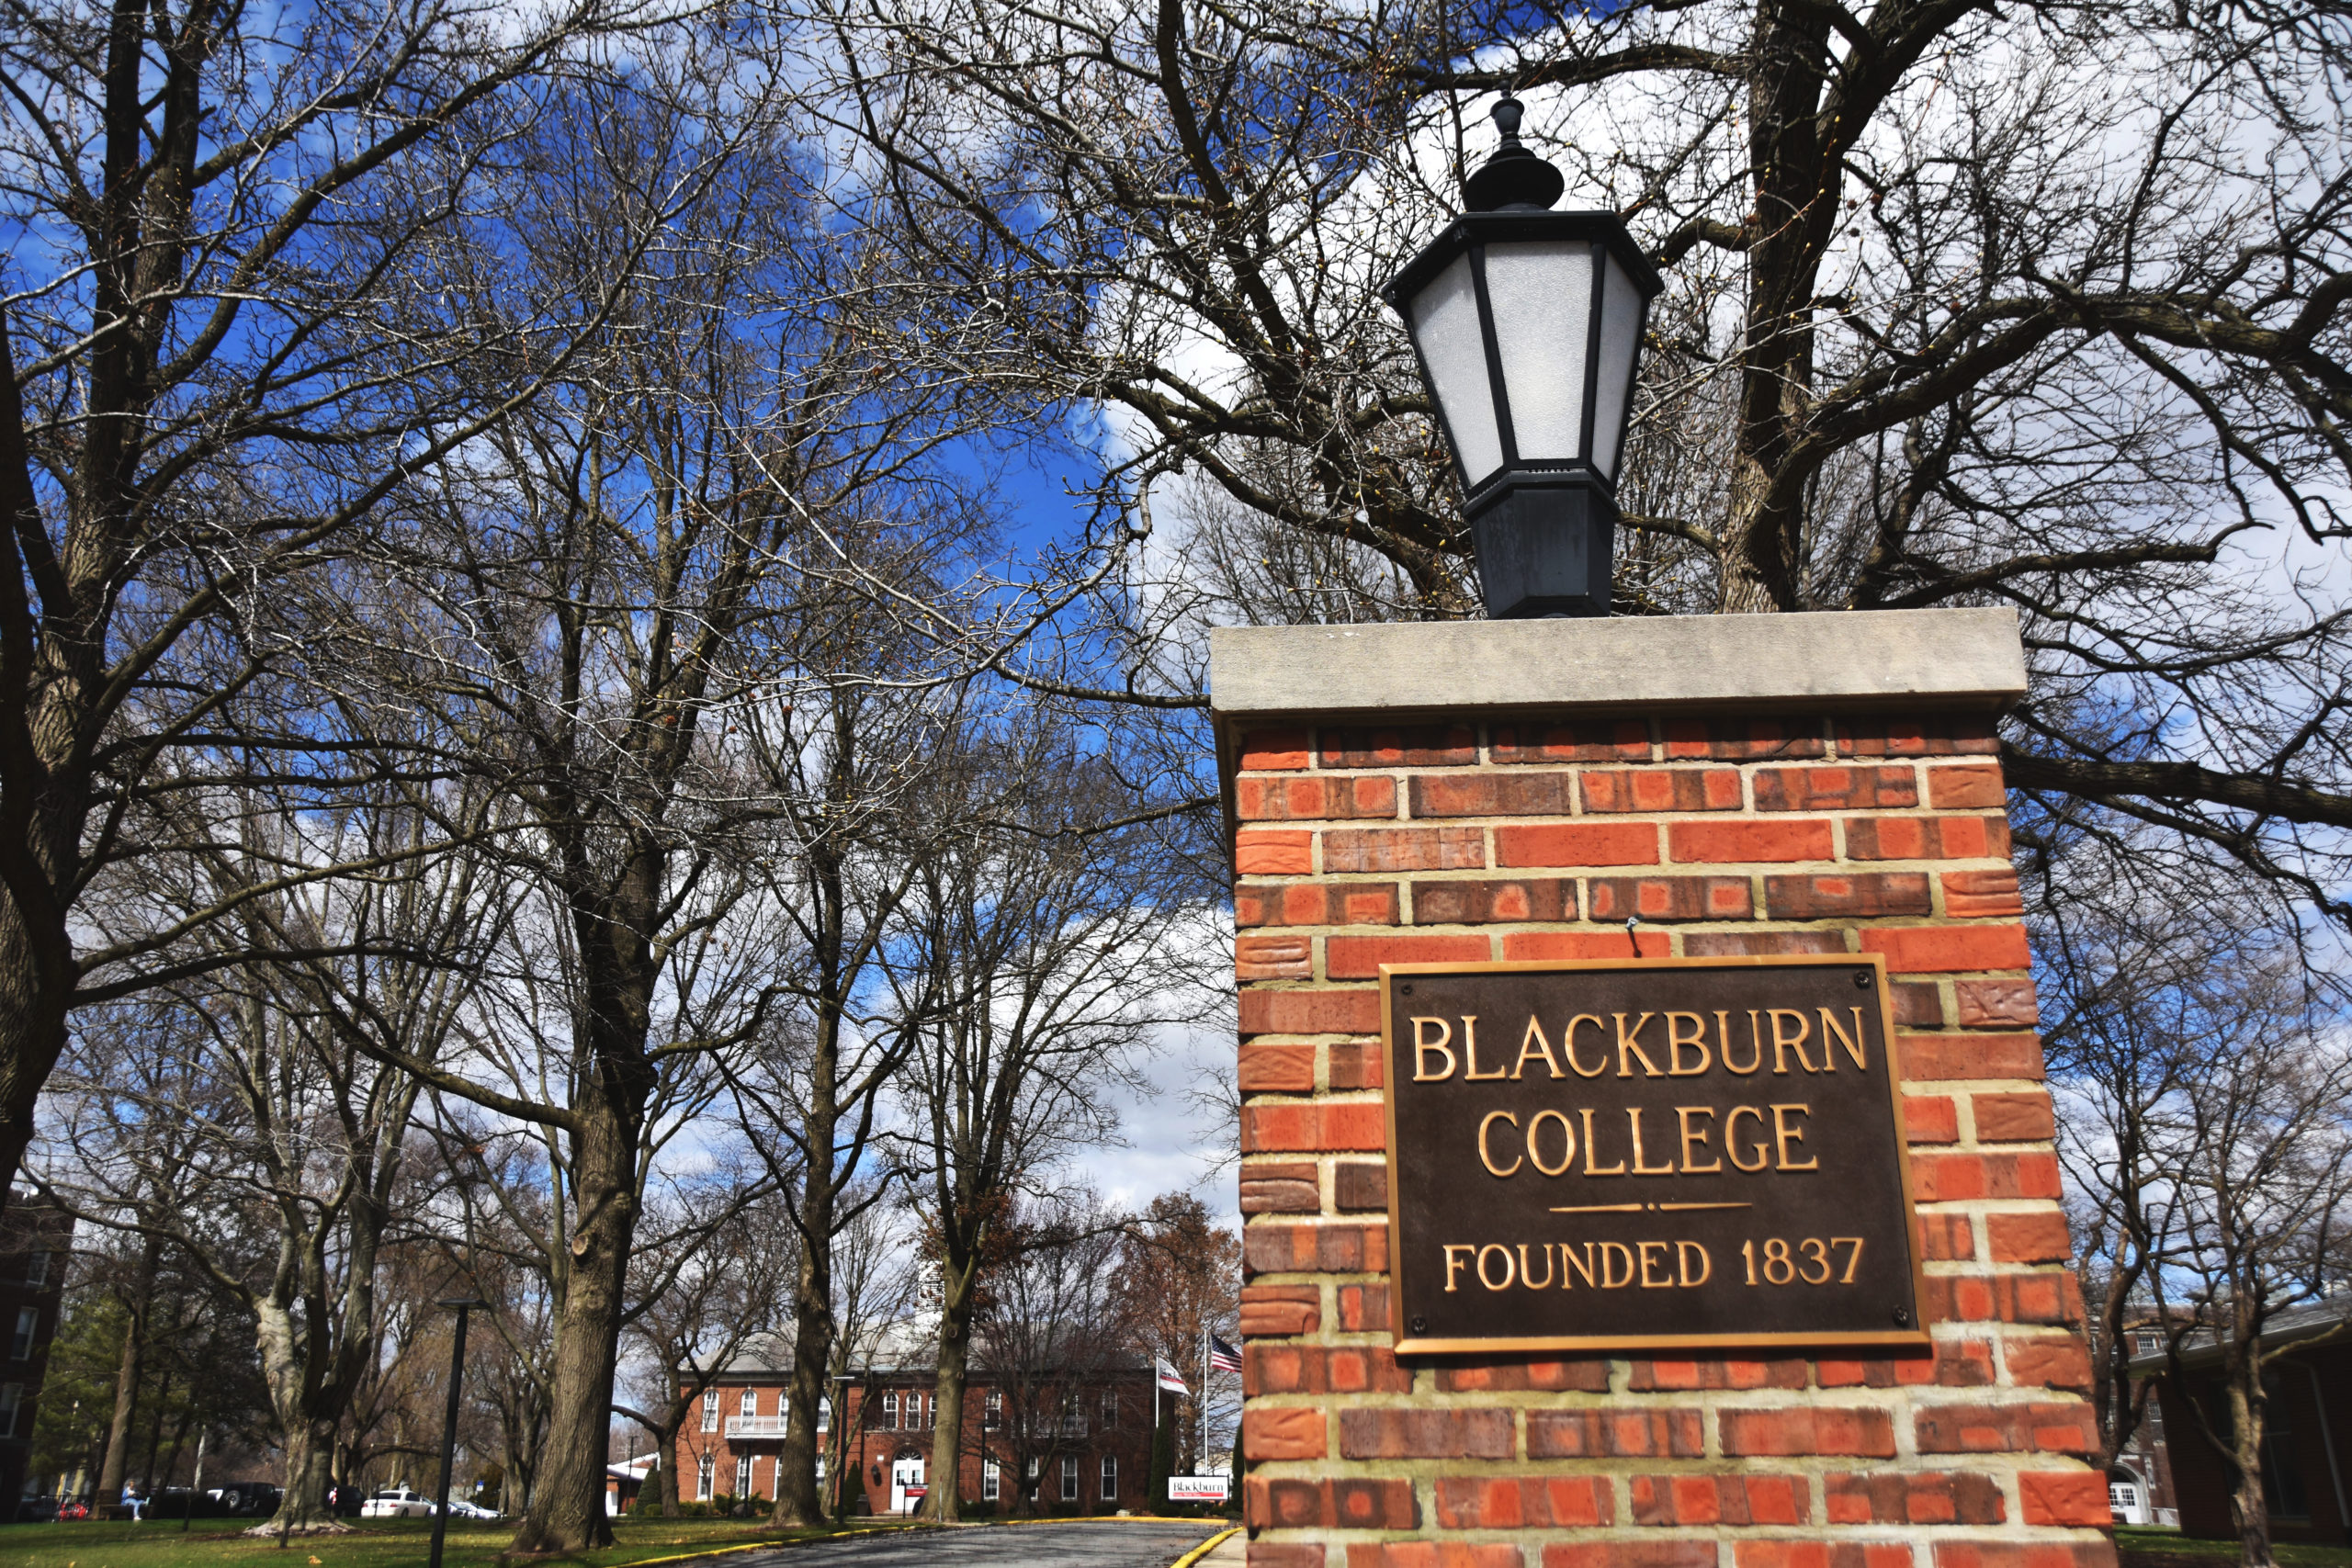 Close-up shot of one of the pillars at the entrance to campus. The pillar has a plaque with the words "Blackburn College. Founded 1837" on it.